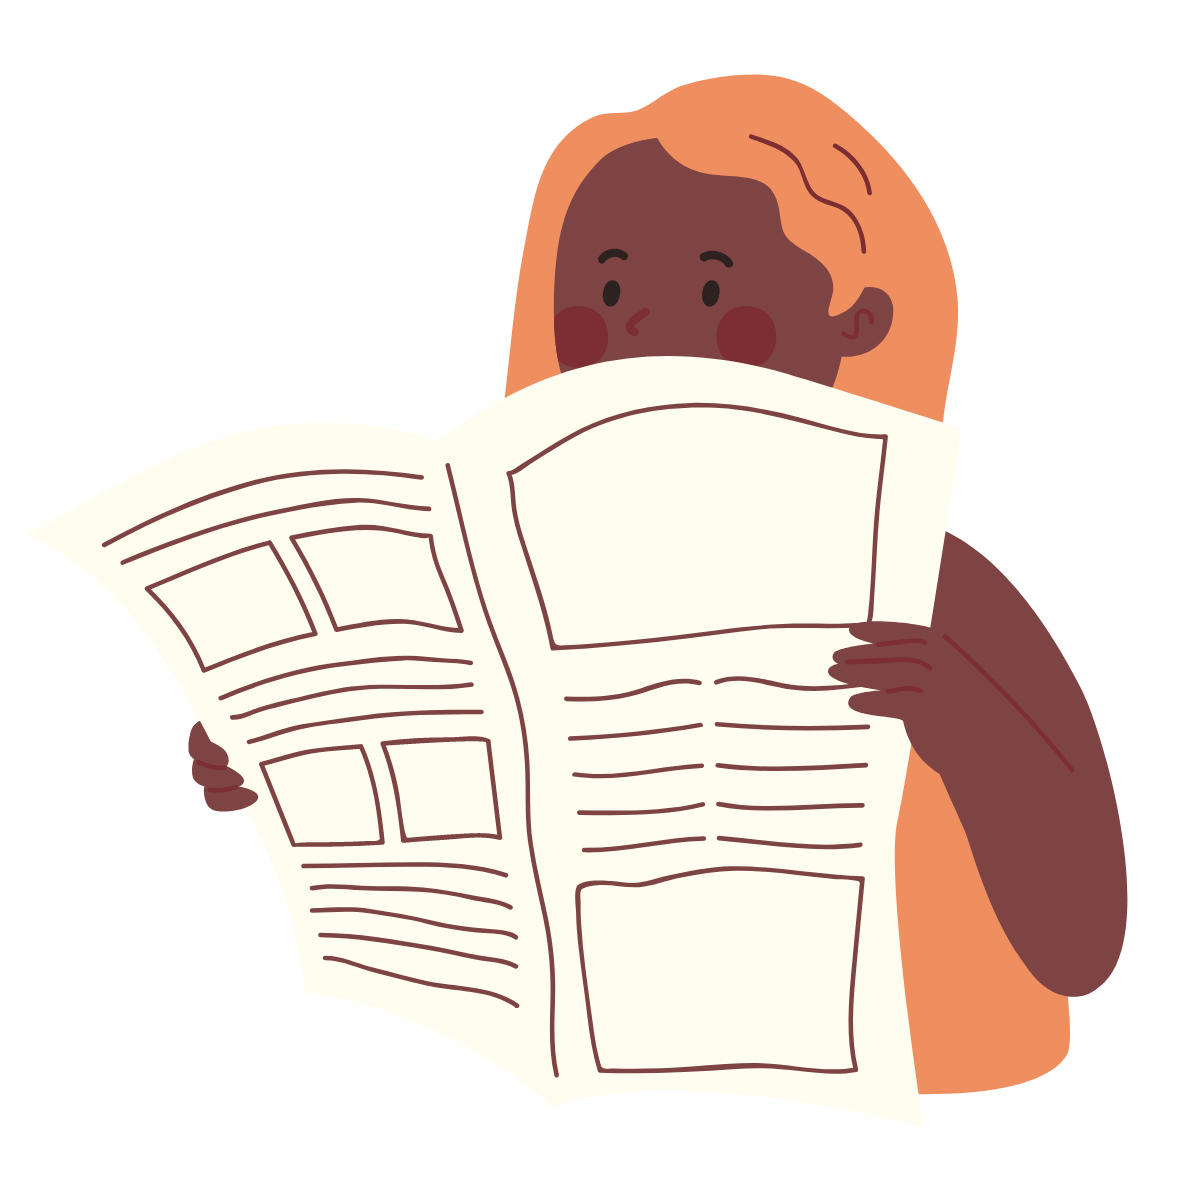 Illustration of a woman reading a newspaper